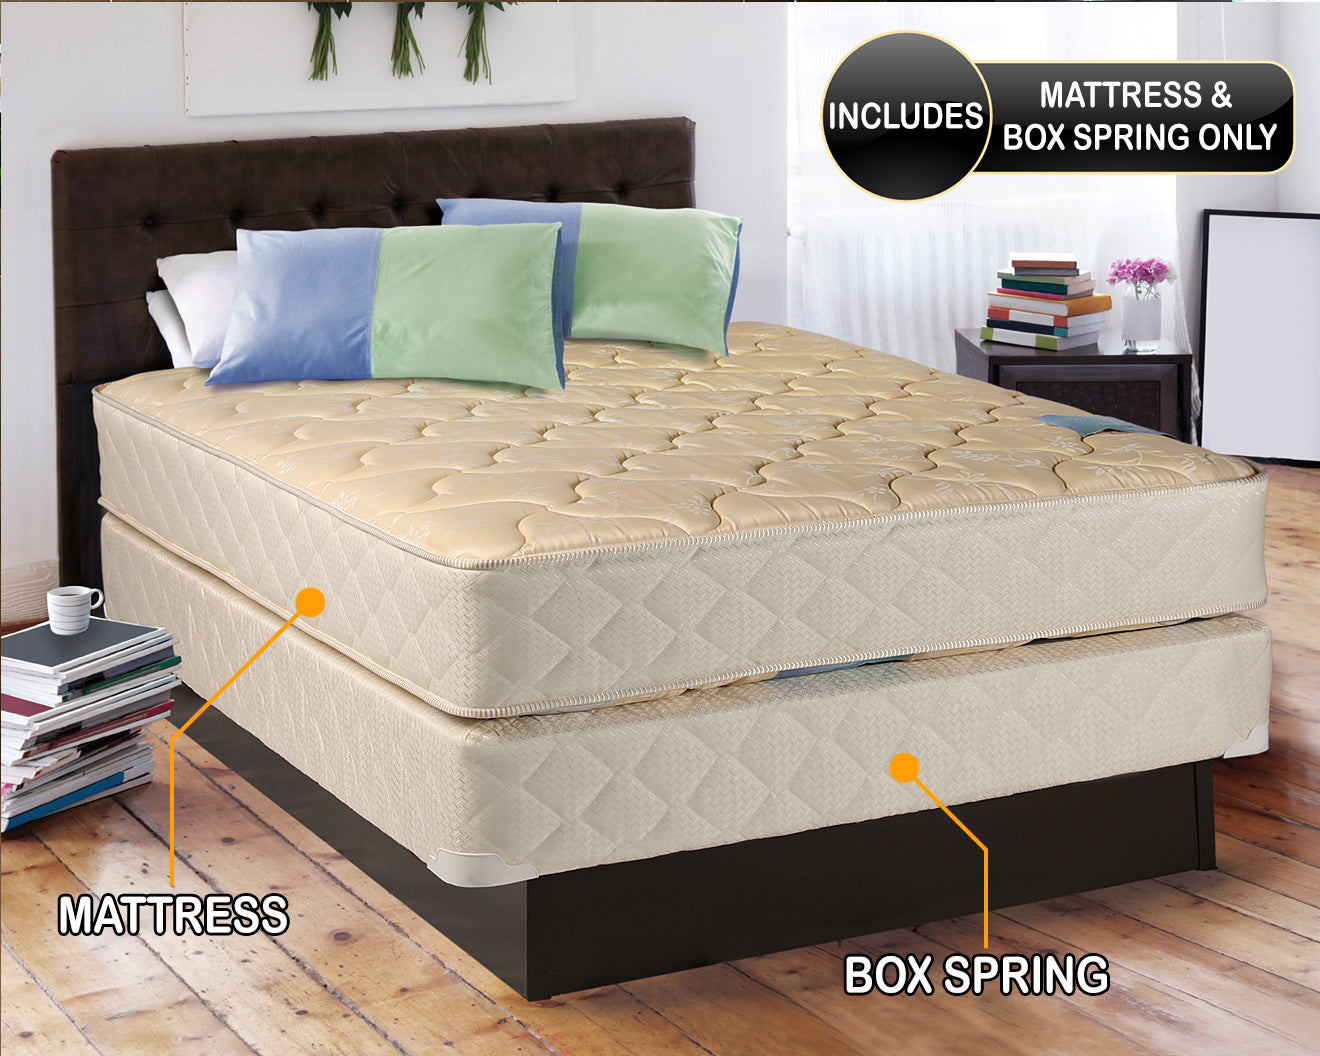 Chiro Premier Orthopedic Gentle Firm (Beige) Twin Size Mattress and Box Spring Set - Fully Assembled, Good for Your Back, Long Lasting and 2 Sided